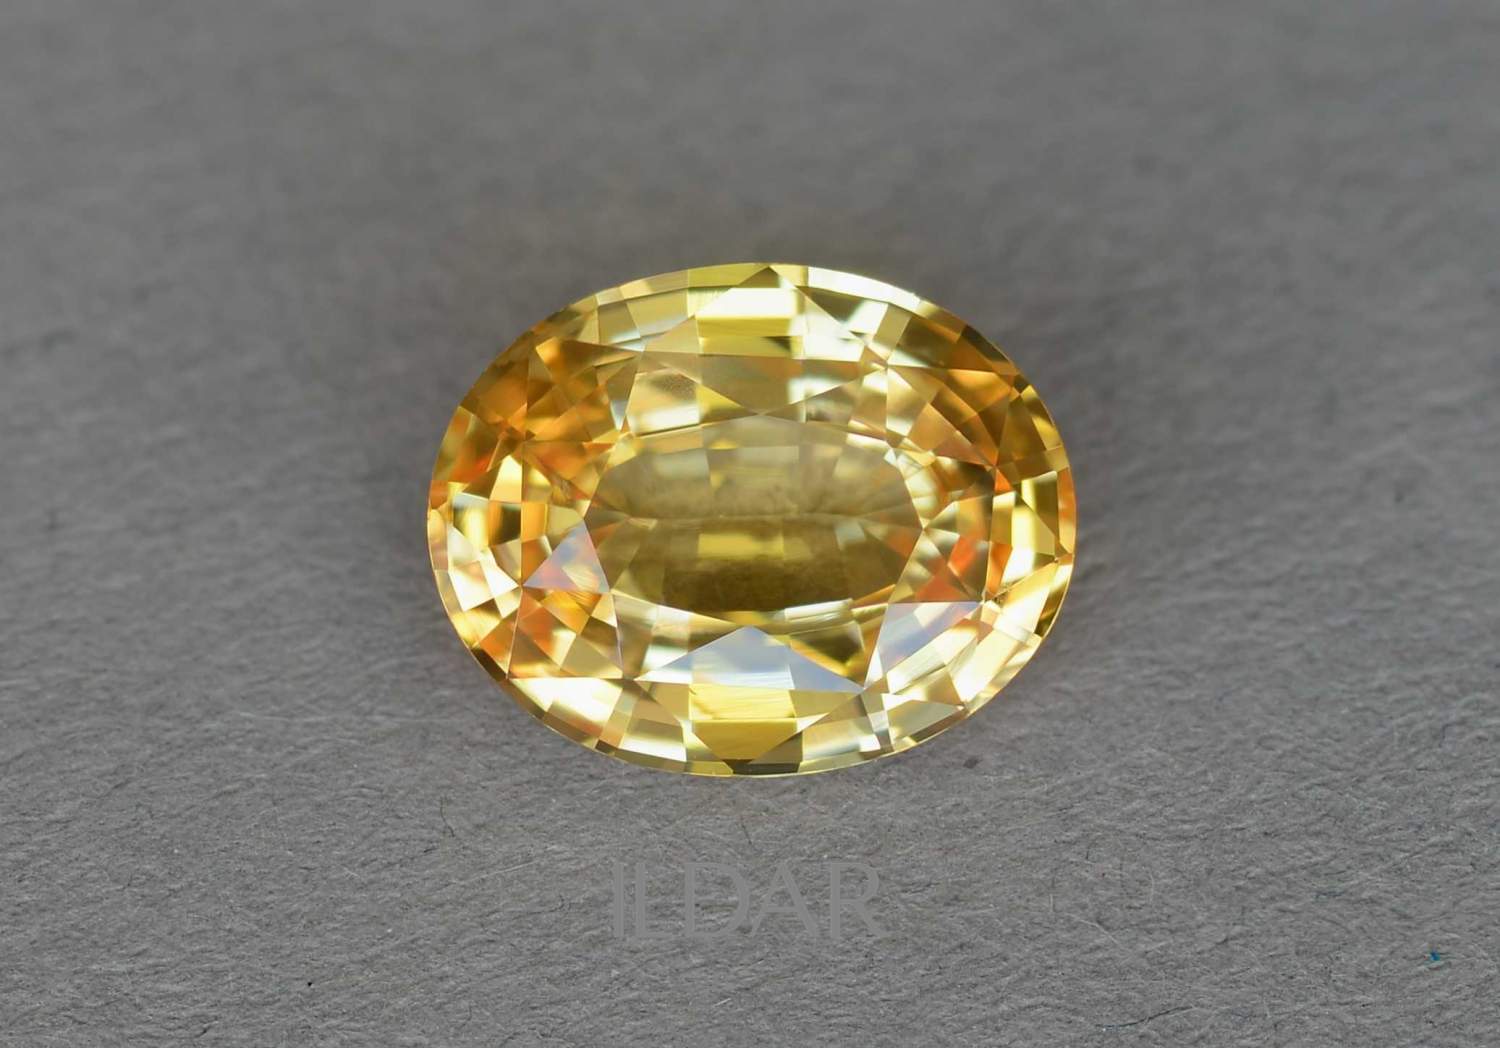 Oval cut unheated yellow sapphire 3.01 ct order